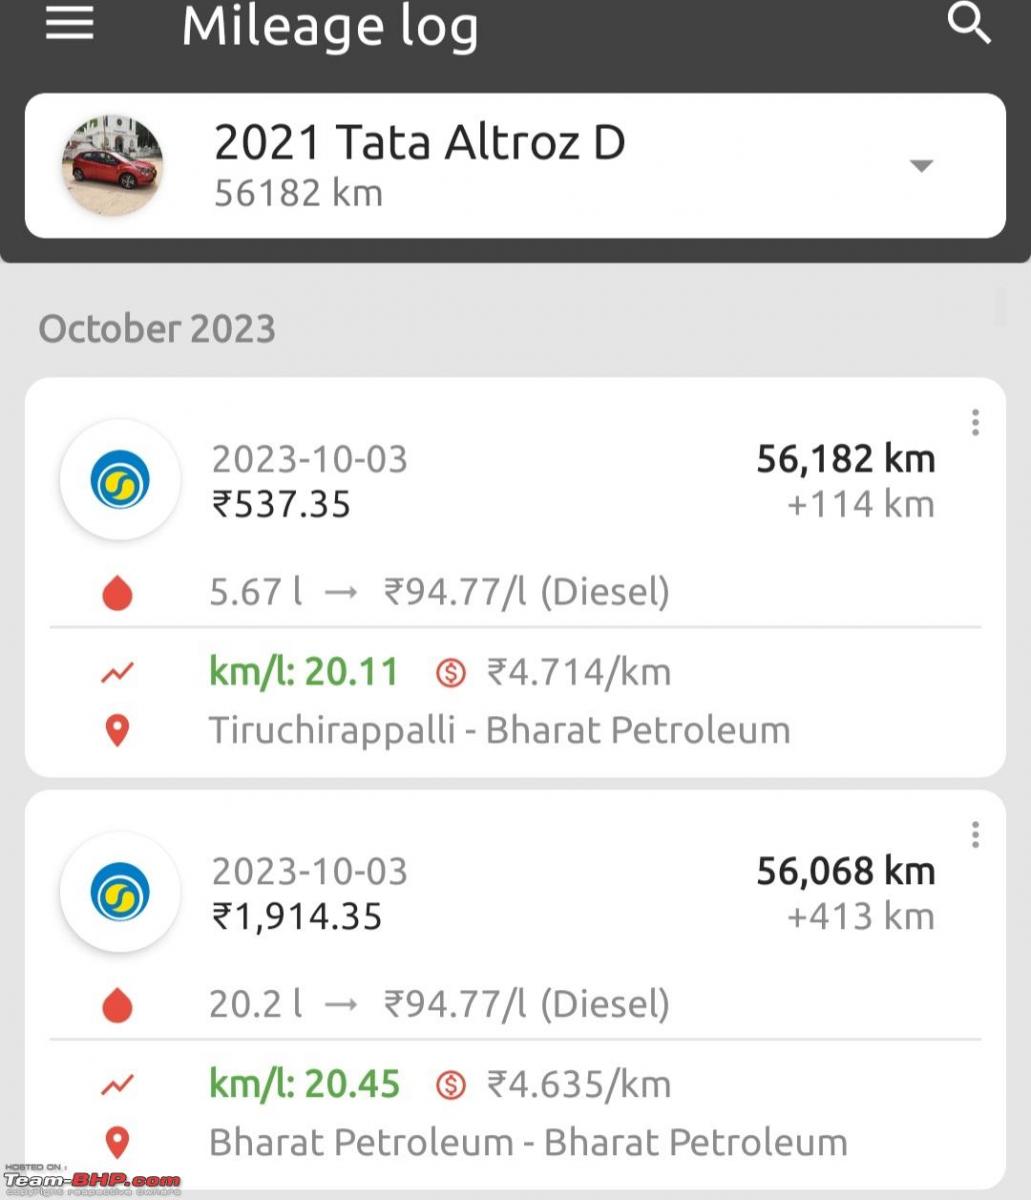 My Tata Altroz diesel idling at a higher rpm than usual, Indian, Member Content, Tata Altroz, Tata Motors, Car ownership